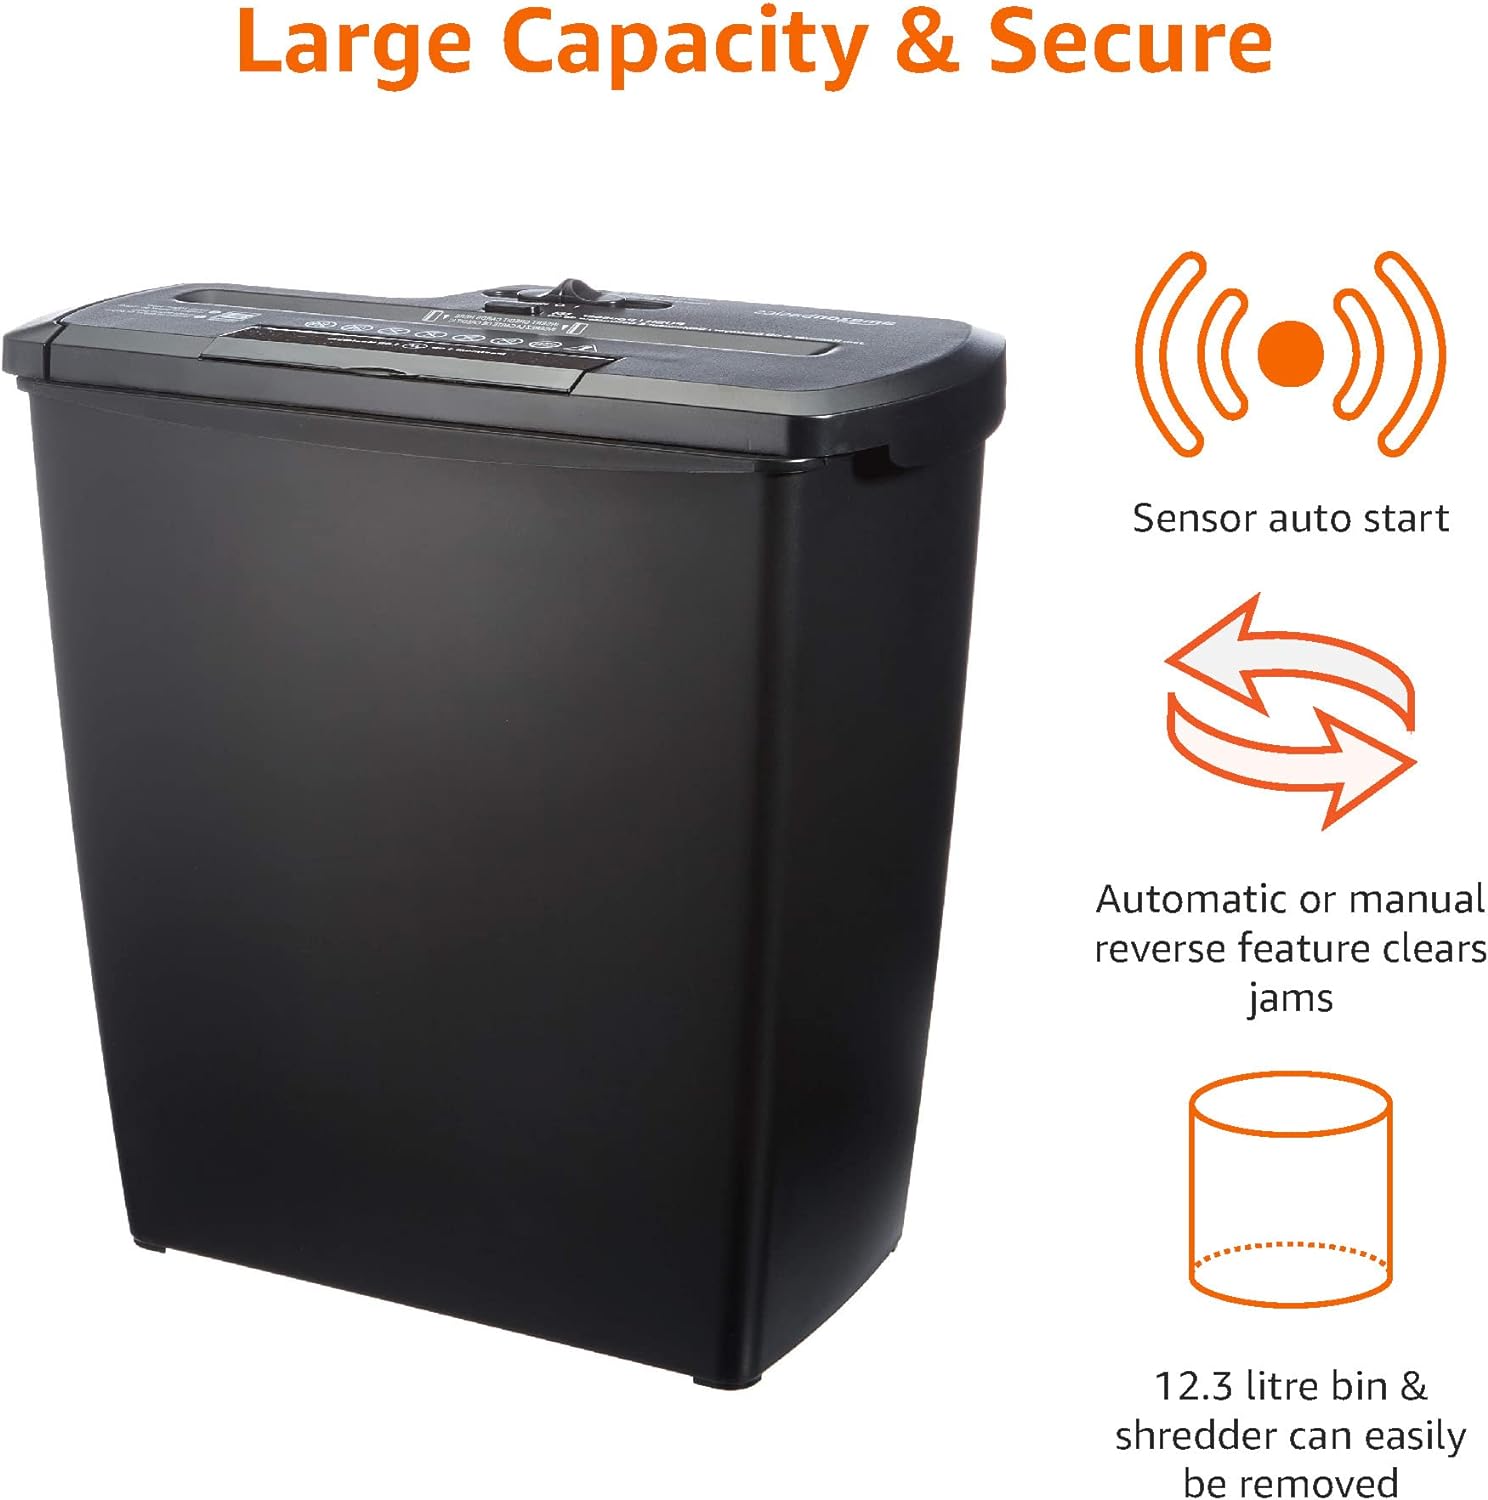 Amazon Basics 7-8 Sheet Strip Cut Paper, Credit Card, CD & DVD Shredder with Bin for Business & Home Office Use with Paper Reverse Function, Black 7032